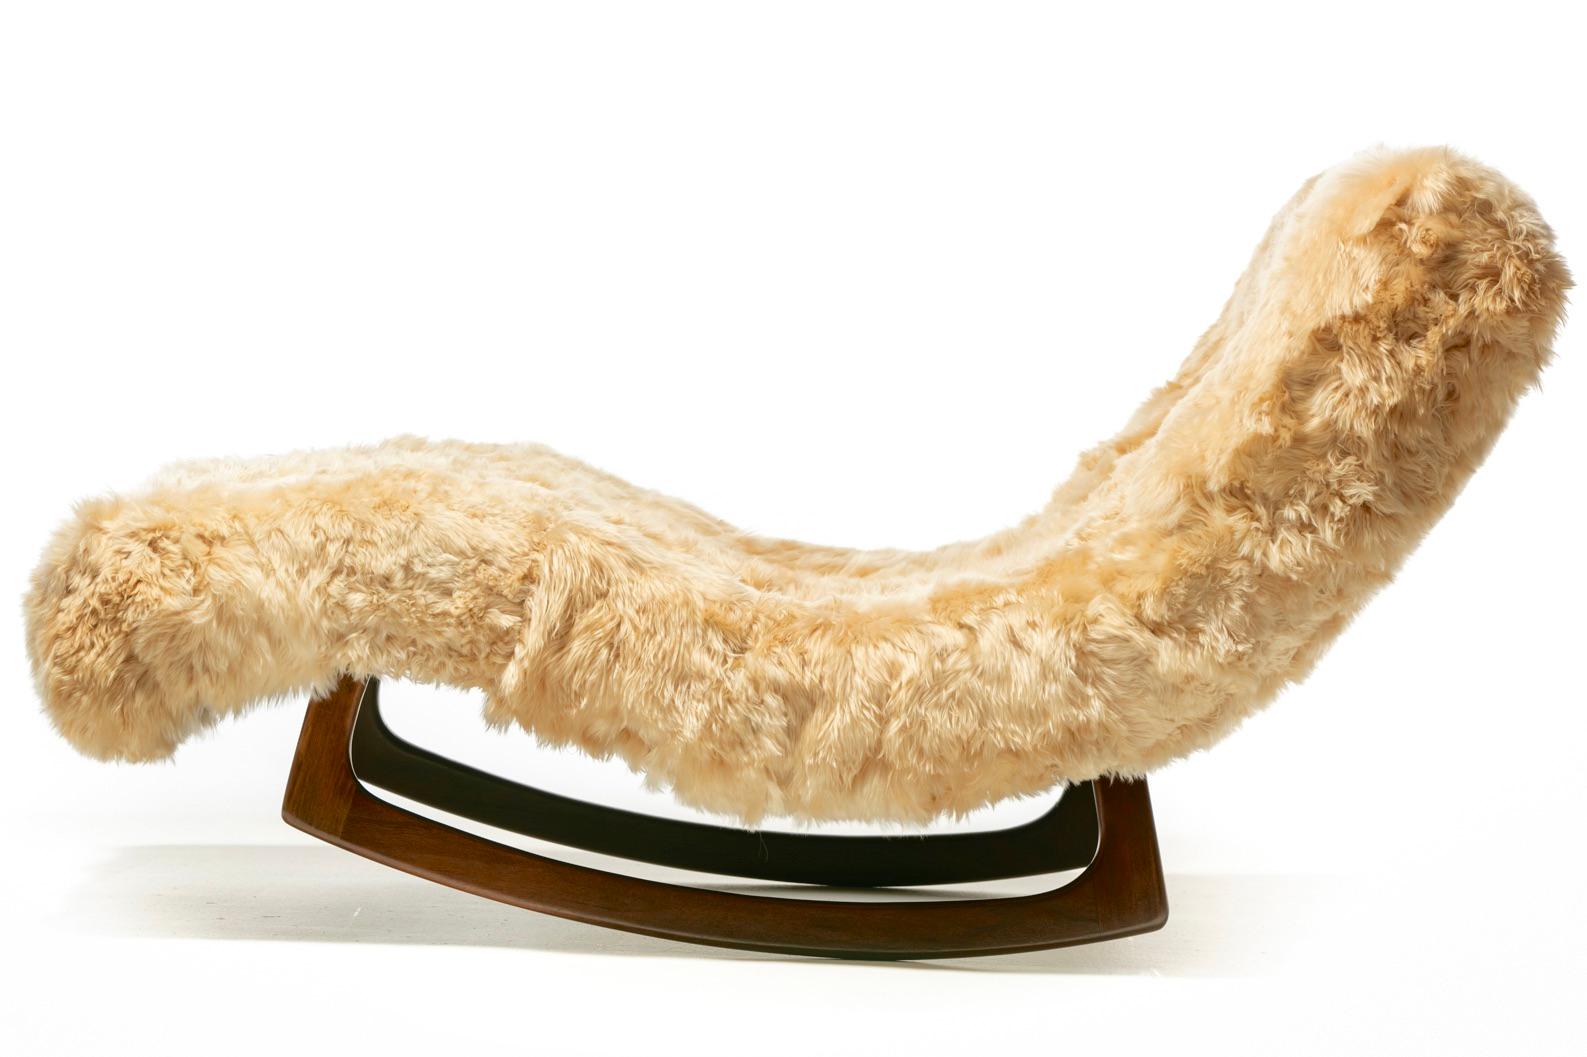 Adrian Pearsall Chaise Lounge Rocker Newly Upholstered in Soft Peruvian Alpaca For Sale 6